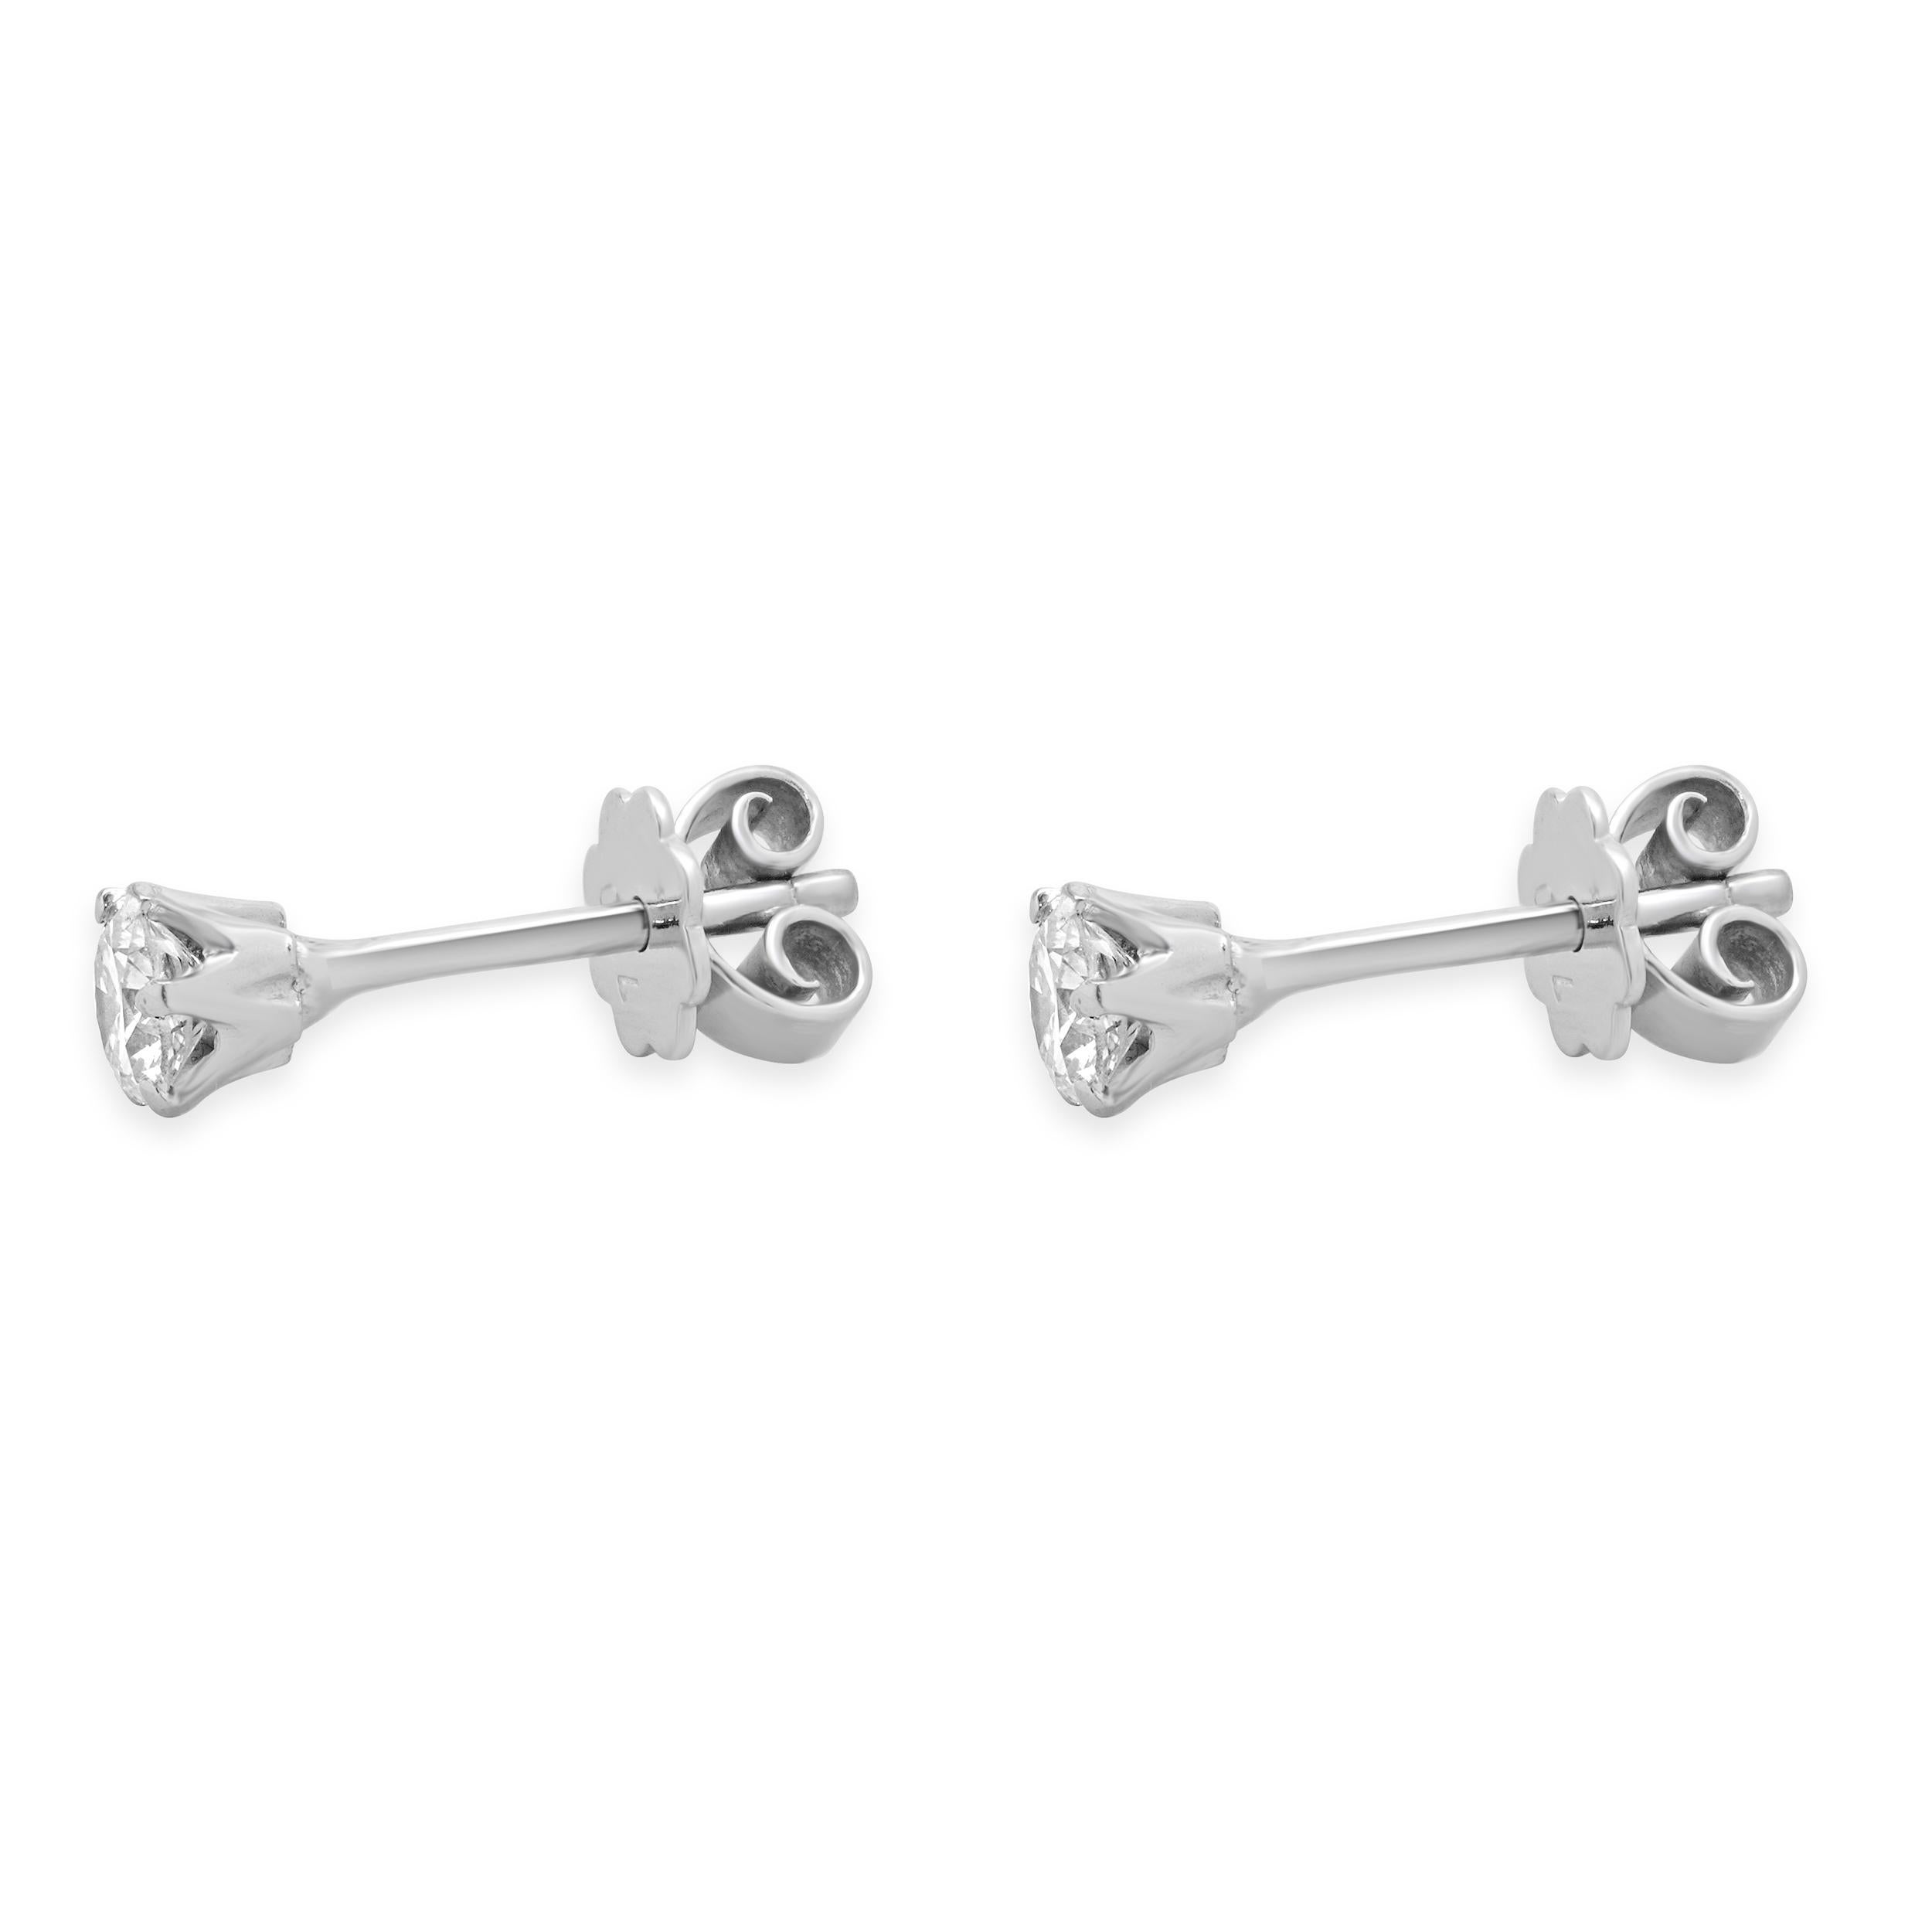 Designer: custom design
Material: 18K white gold
Diamonds: 2 round brilliant cut =0.80cttw
Color: I
Clarity: SI2-3
Dimensions: earrings measure 5mm 
Weight: 1.95 grams
